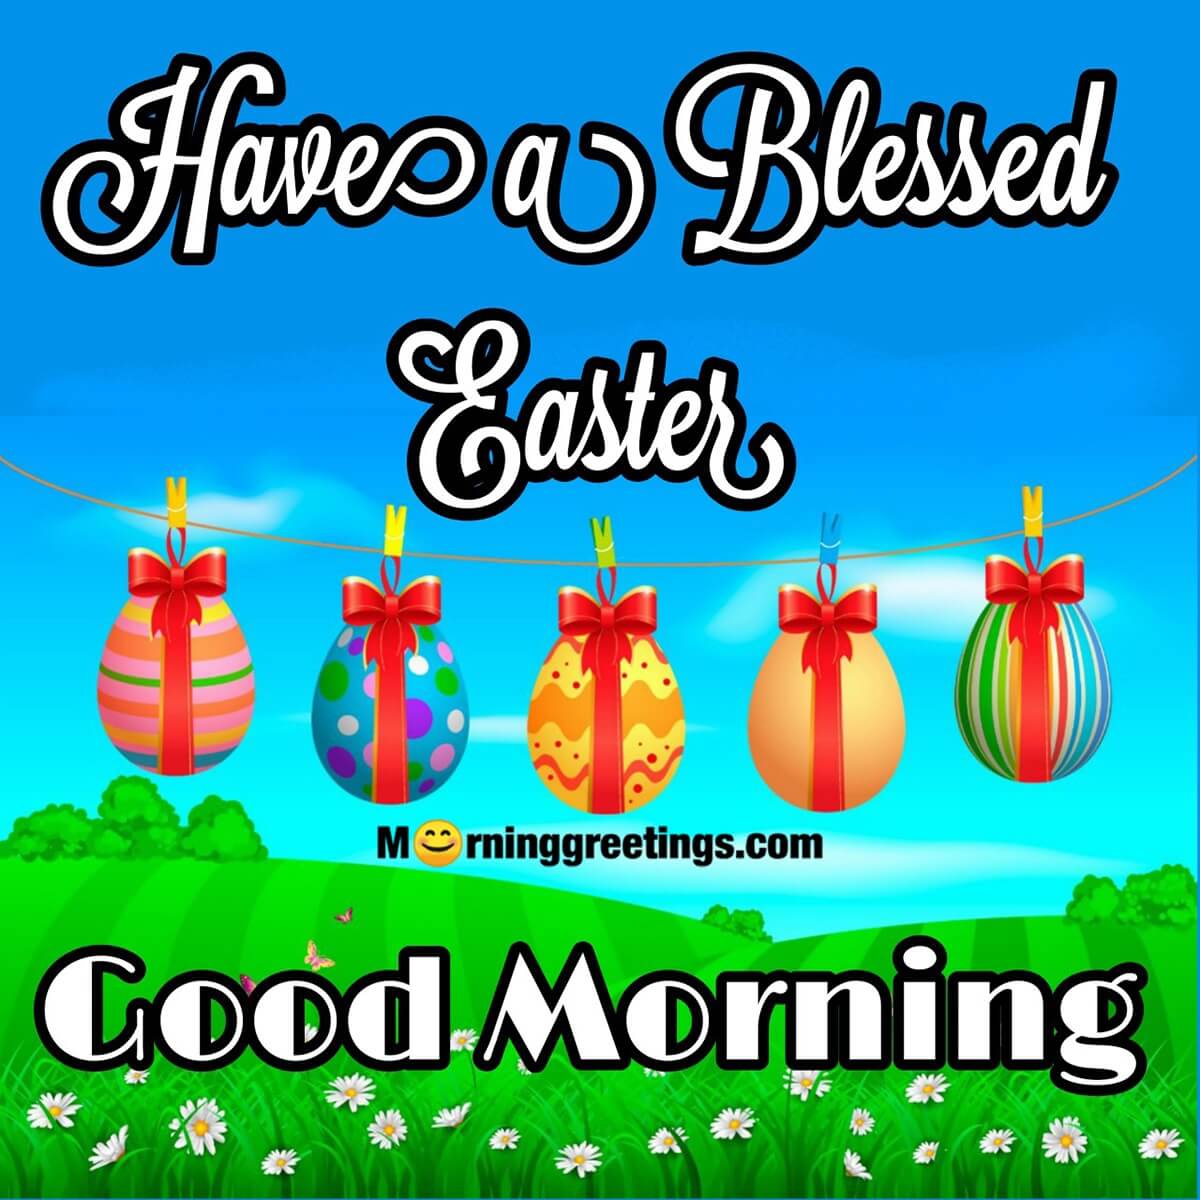 Good Morning Have A Blessed Easter